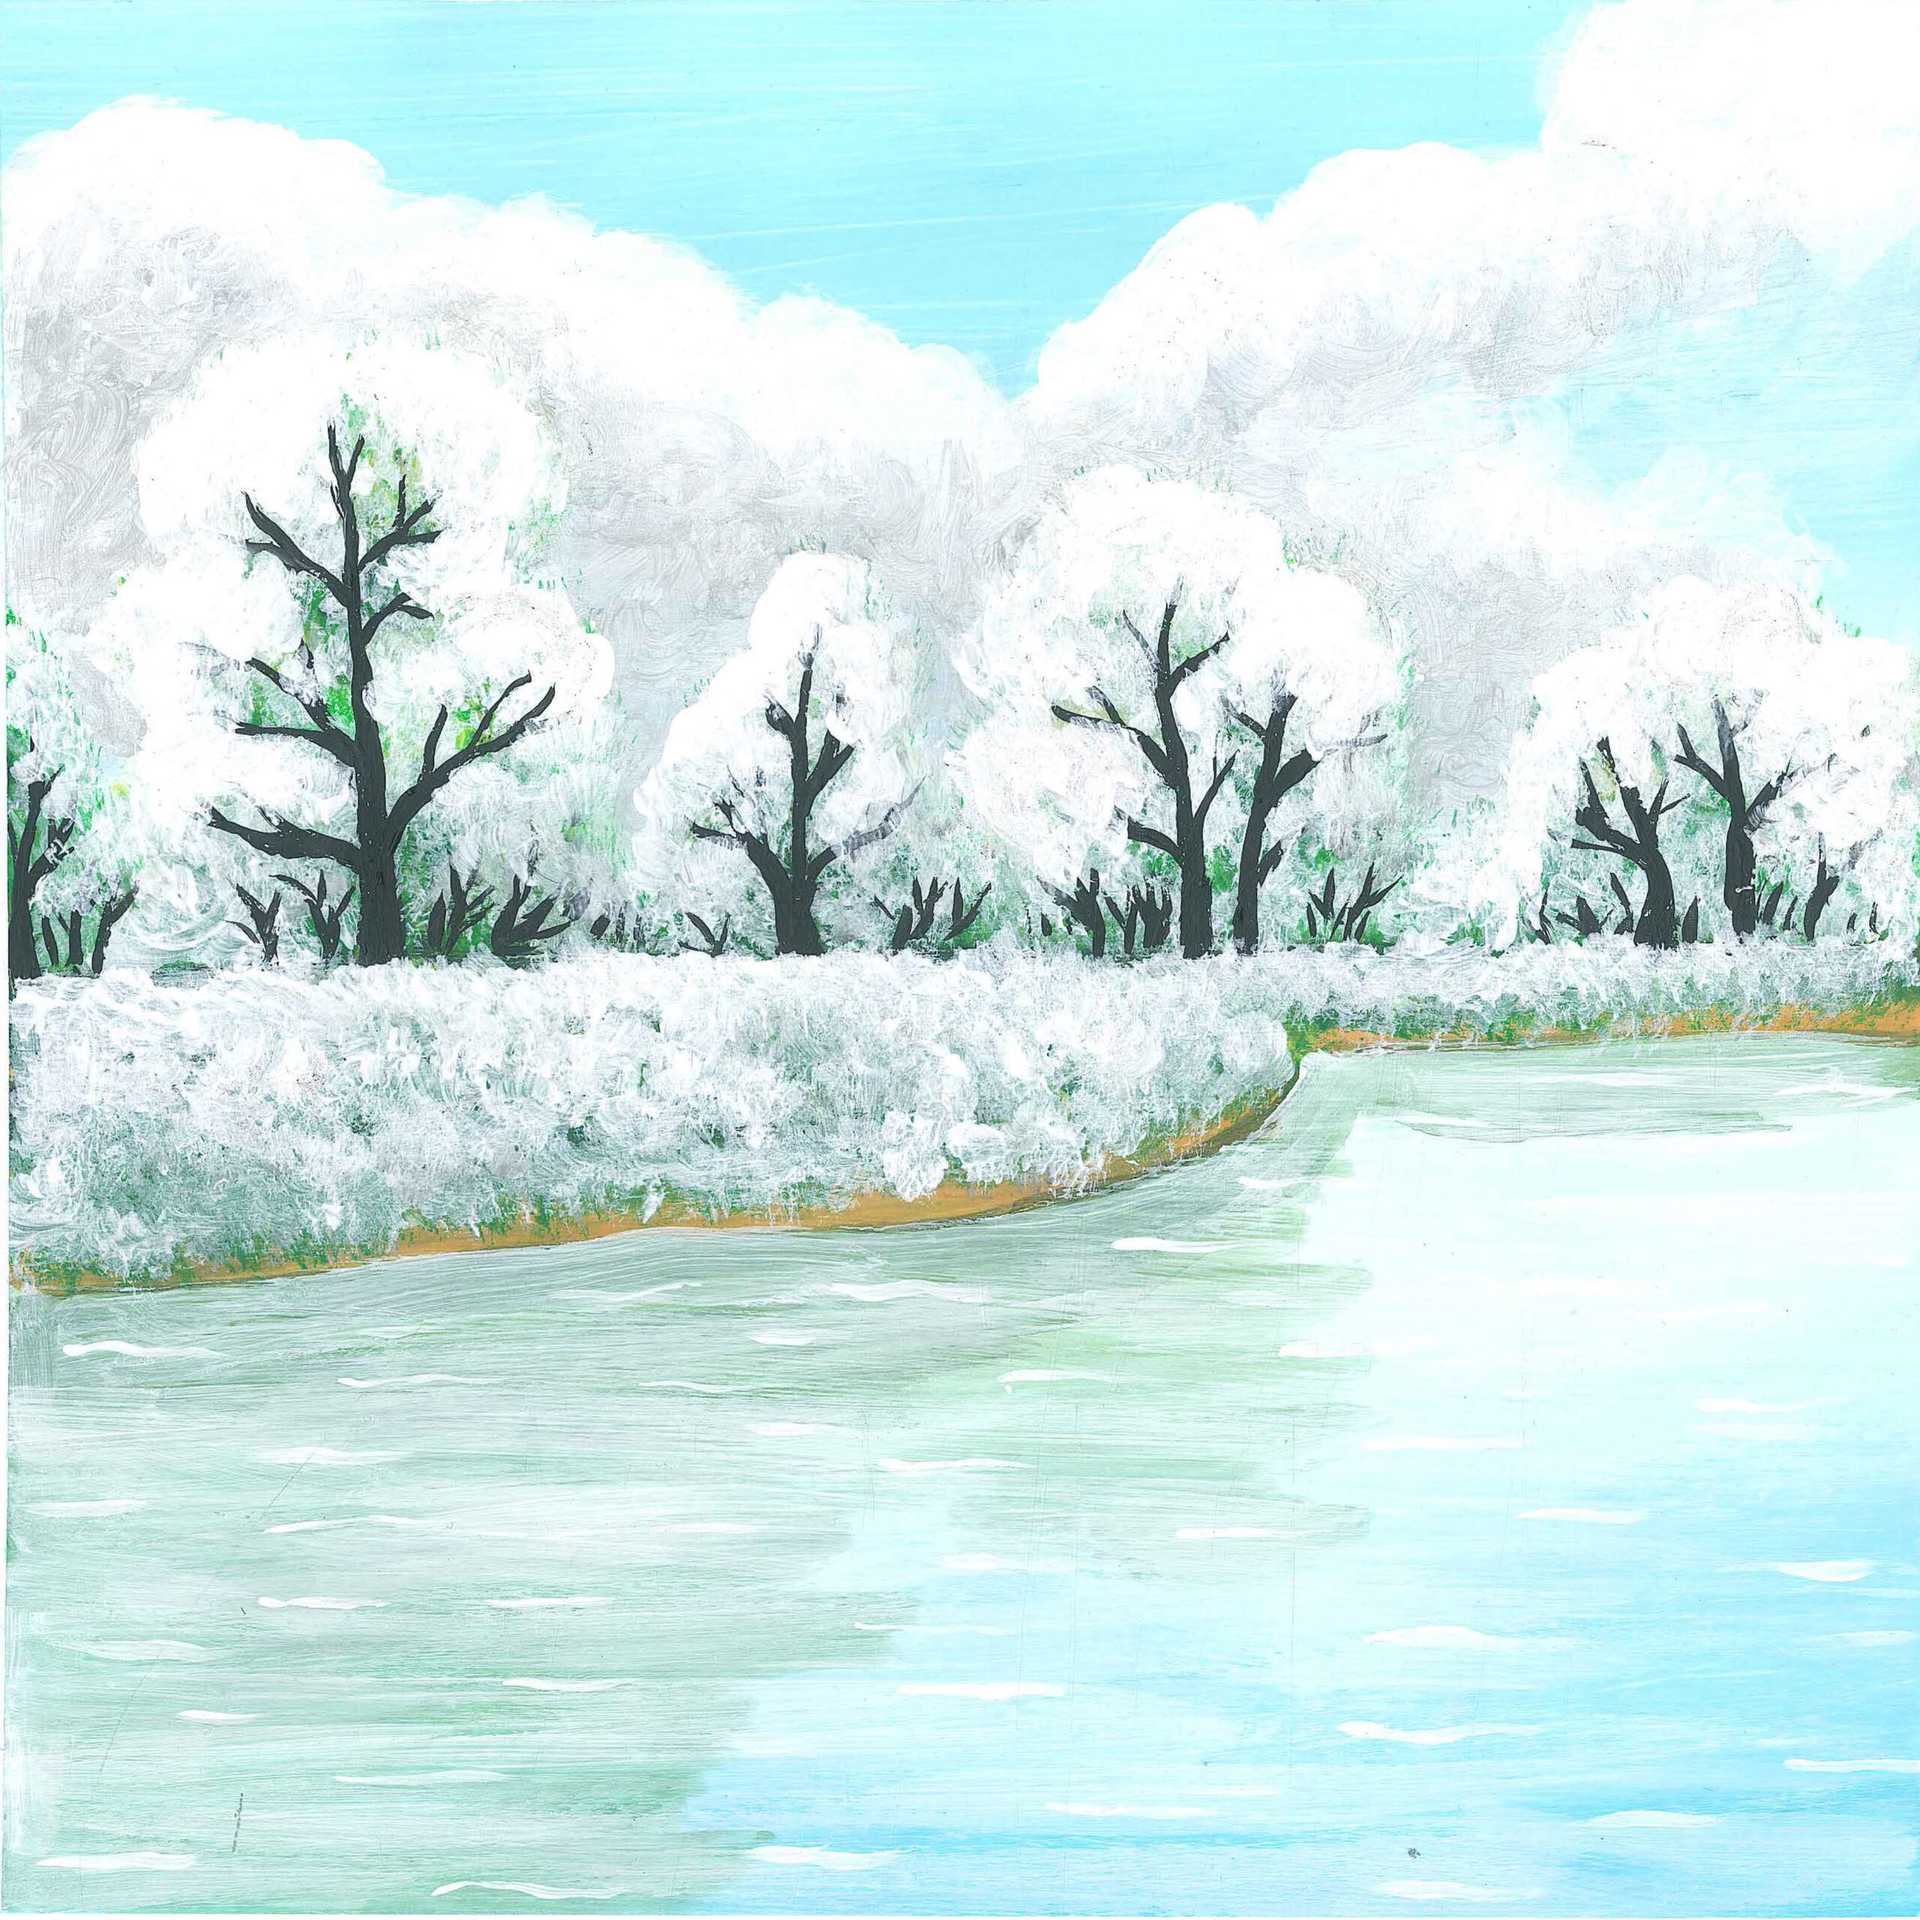 Winter on the Warta River - nature landscape painting - earth.fm